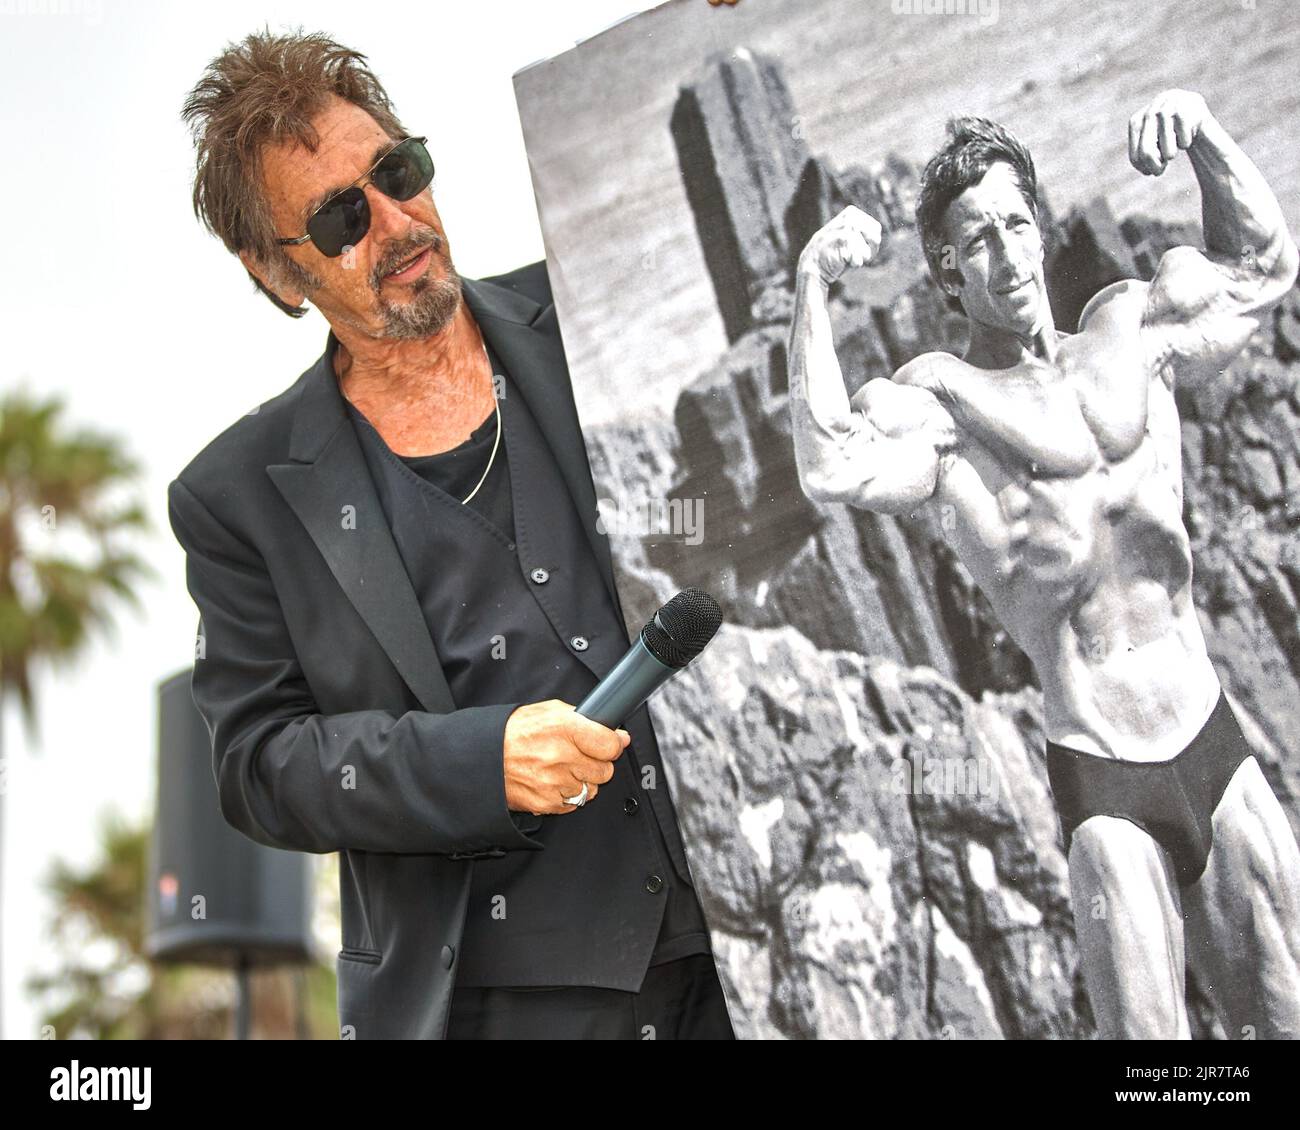 Venice, California, USA. 4th July, 2012. Al Pacino at Muscle Beach Venice California to induct his long time friend and personal fitness trainer Eddie Guiliani into the Muscle Beach Hall Of Fame. (Credit Image: © Ian L. Sitren/ZUMA Press Wire) Stock Photo